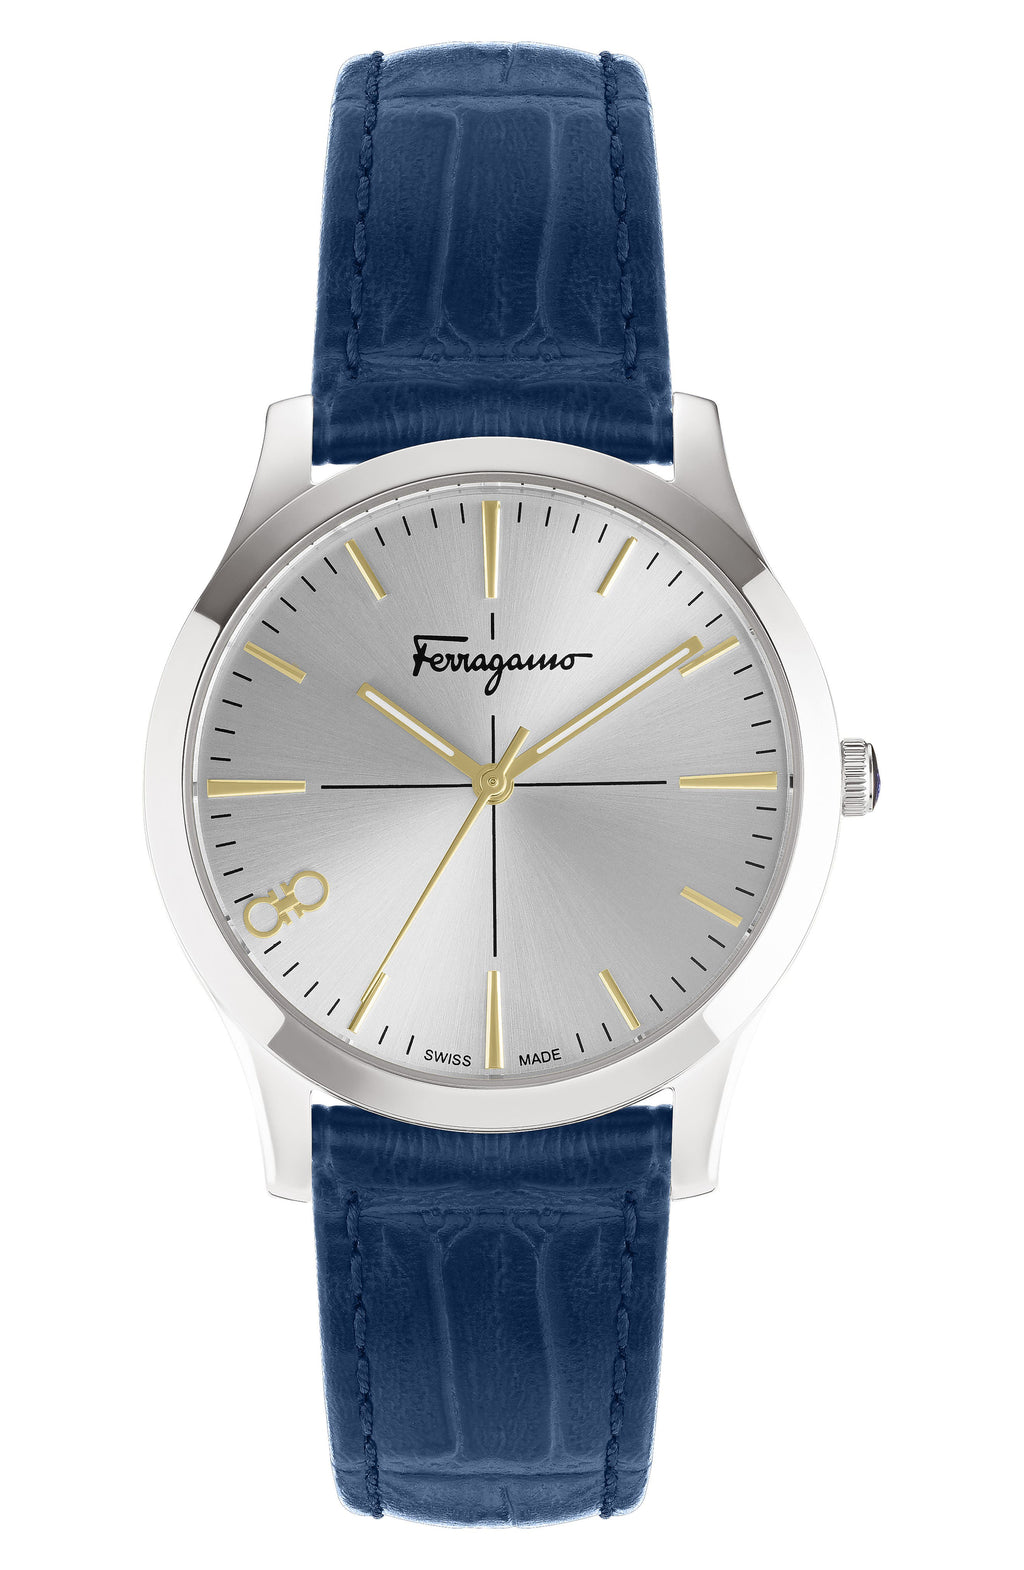 FERRAGAMO Croc-Embossed Leather Strap Watch, 35mm, Main, color, STAINLESS STEEL